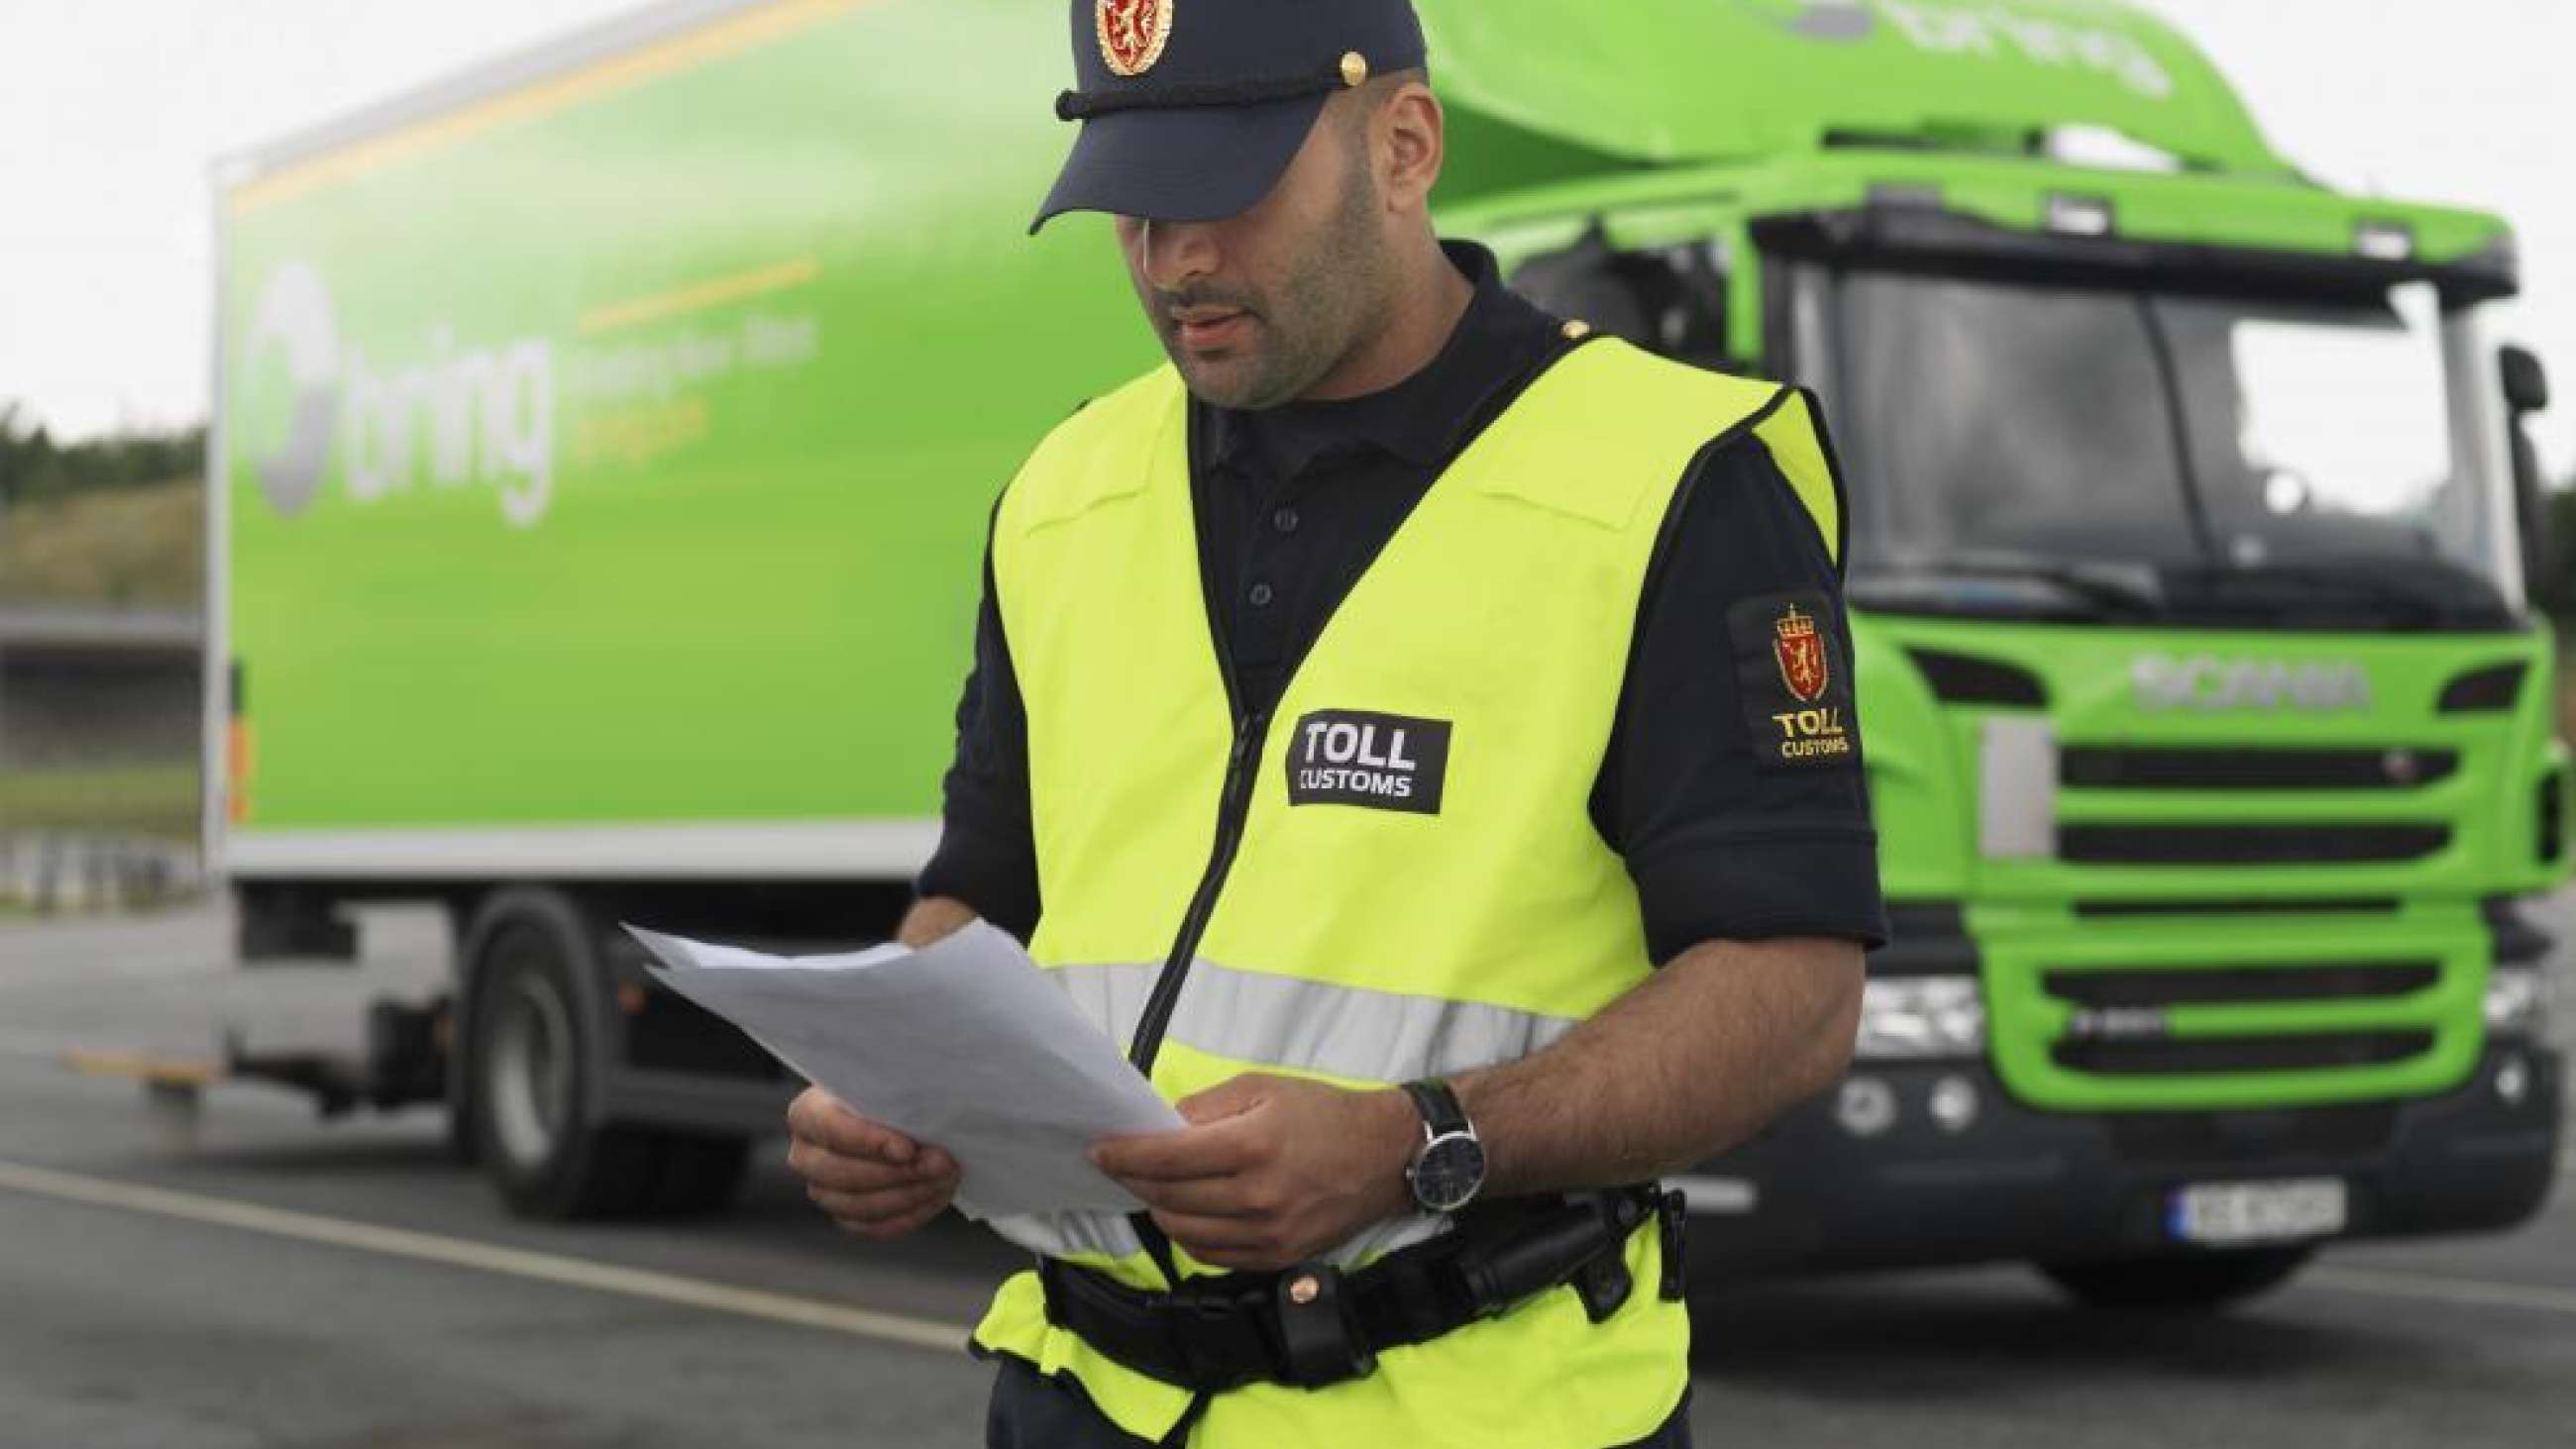 A customs officer checks documents in front of a green truck from Bring.